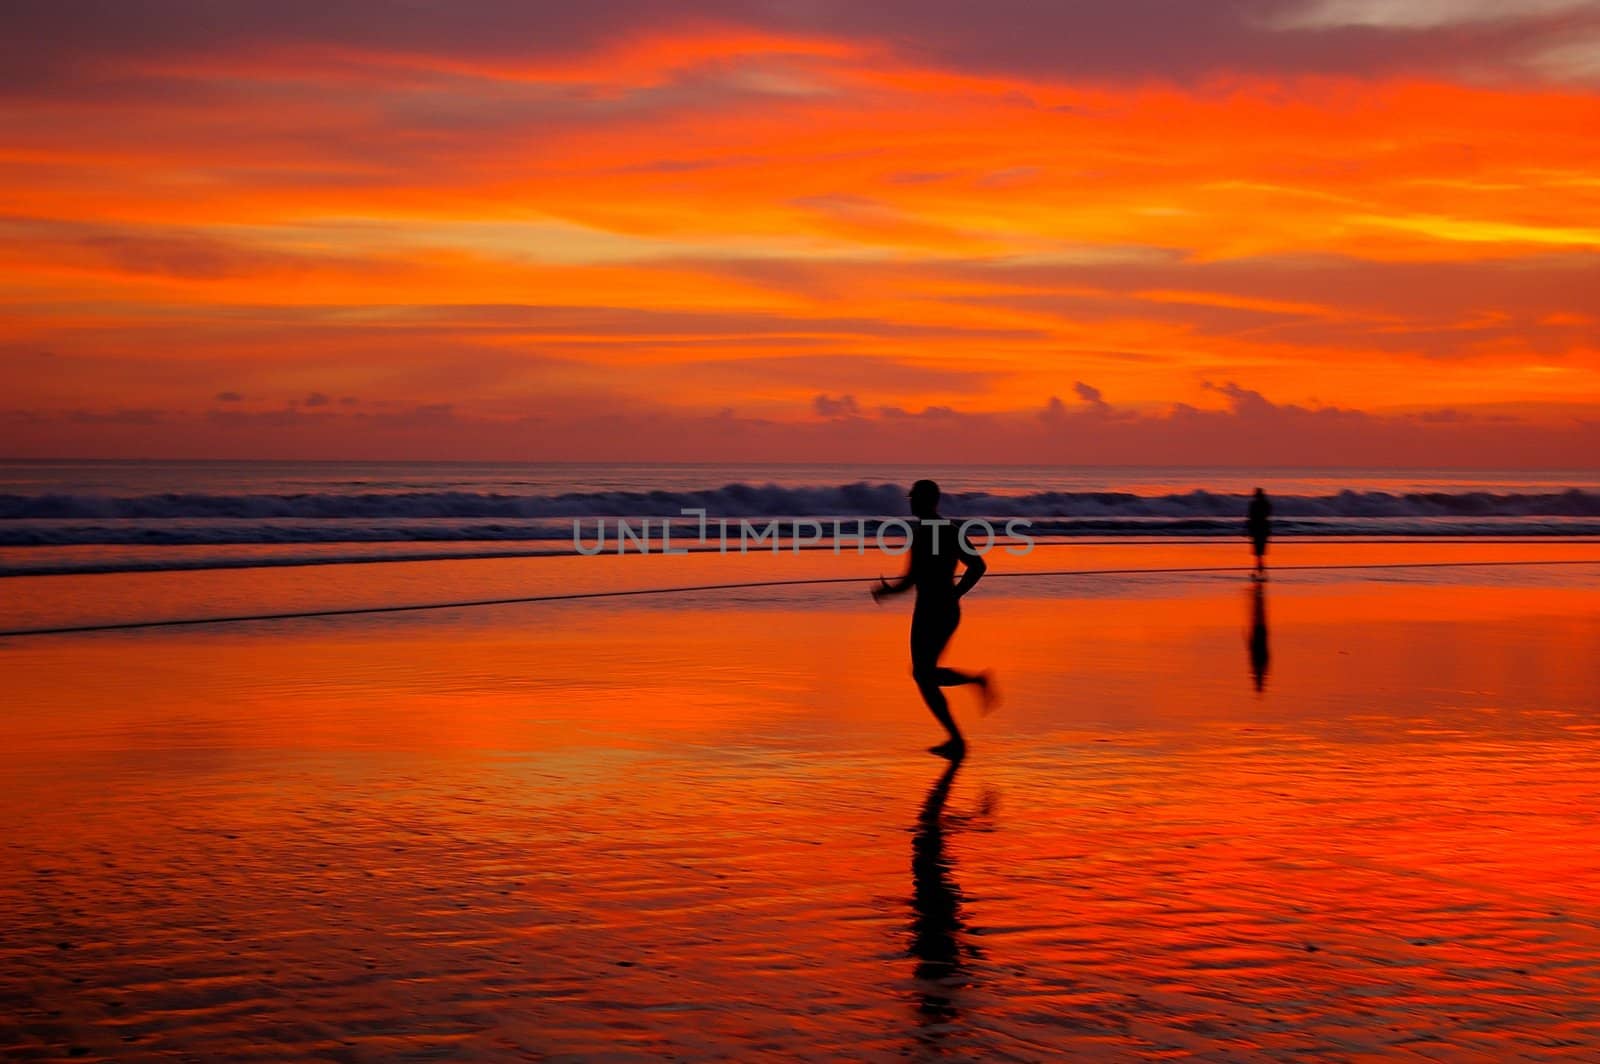 Jogging at sunset, Double Six beach, Bali, Indonesia.